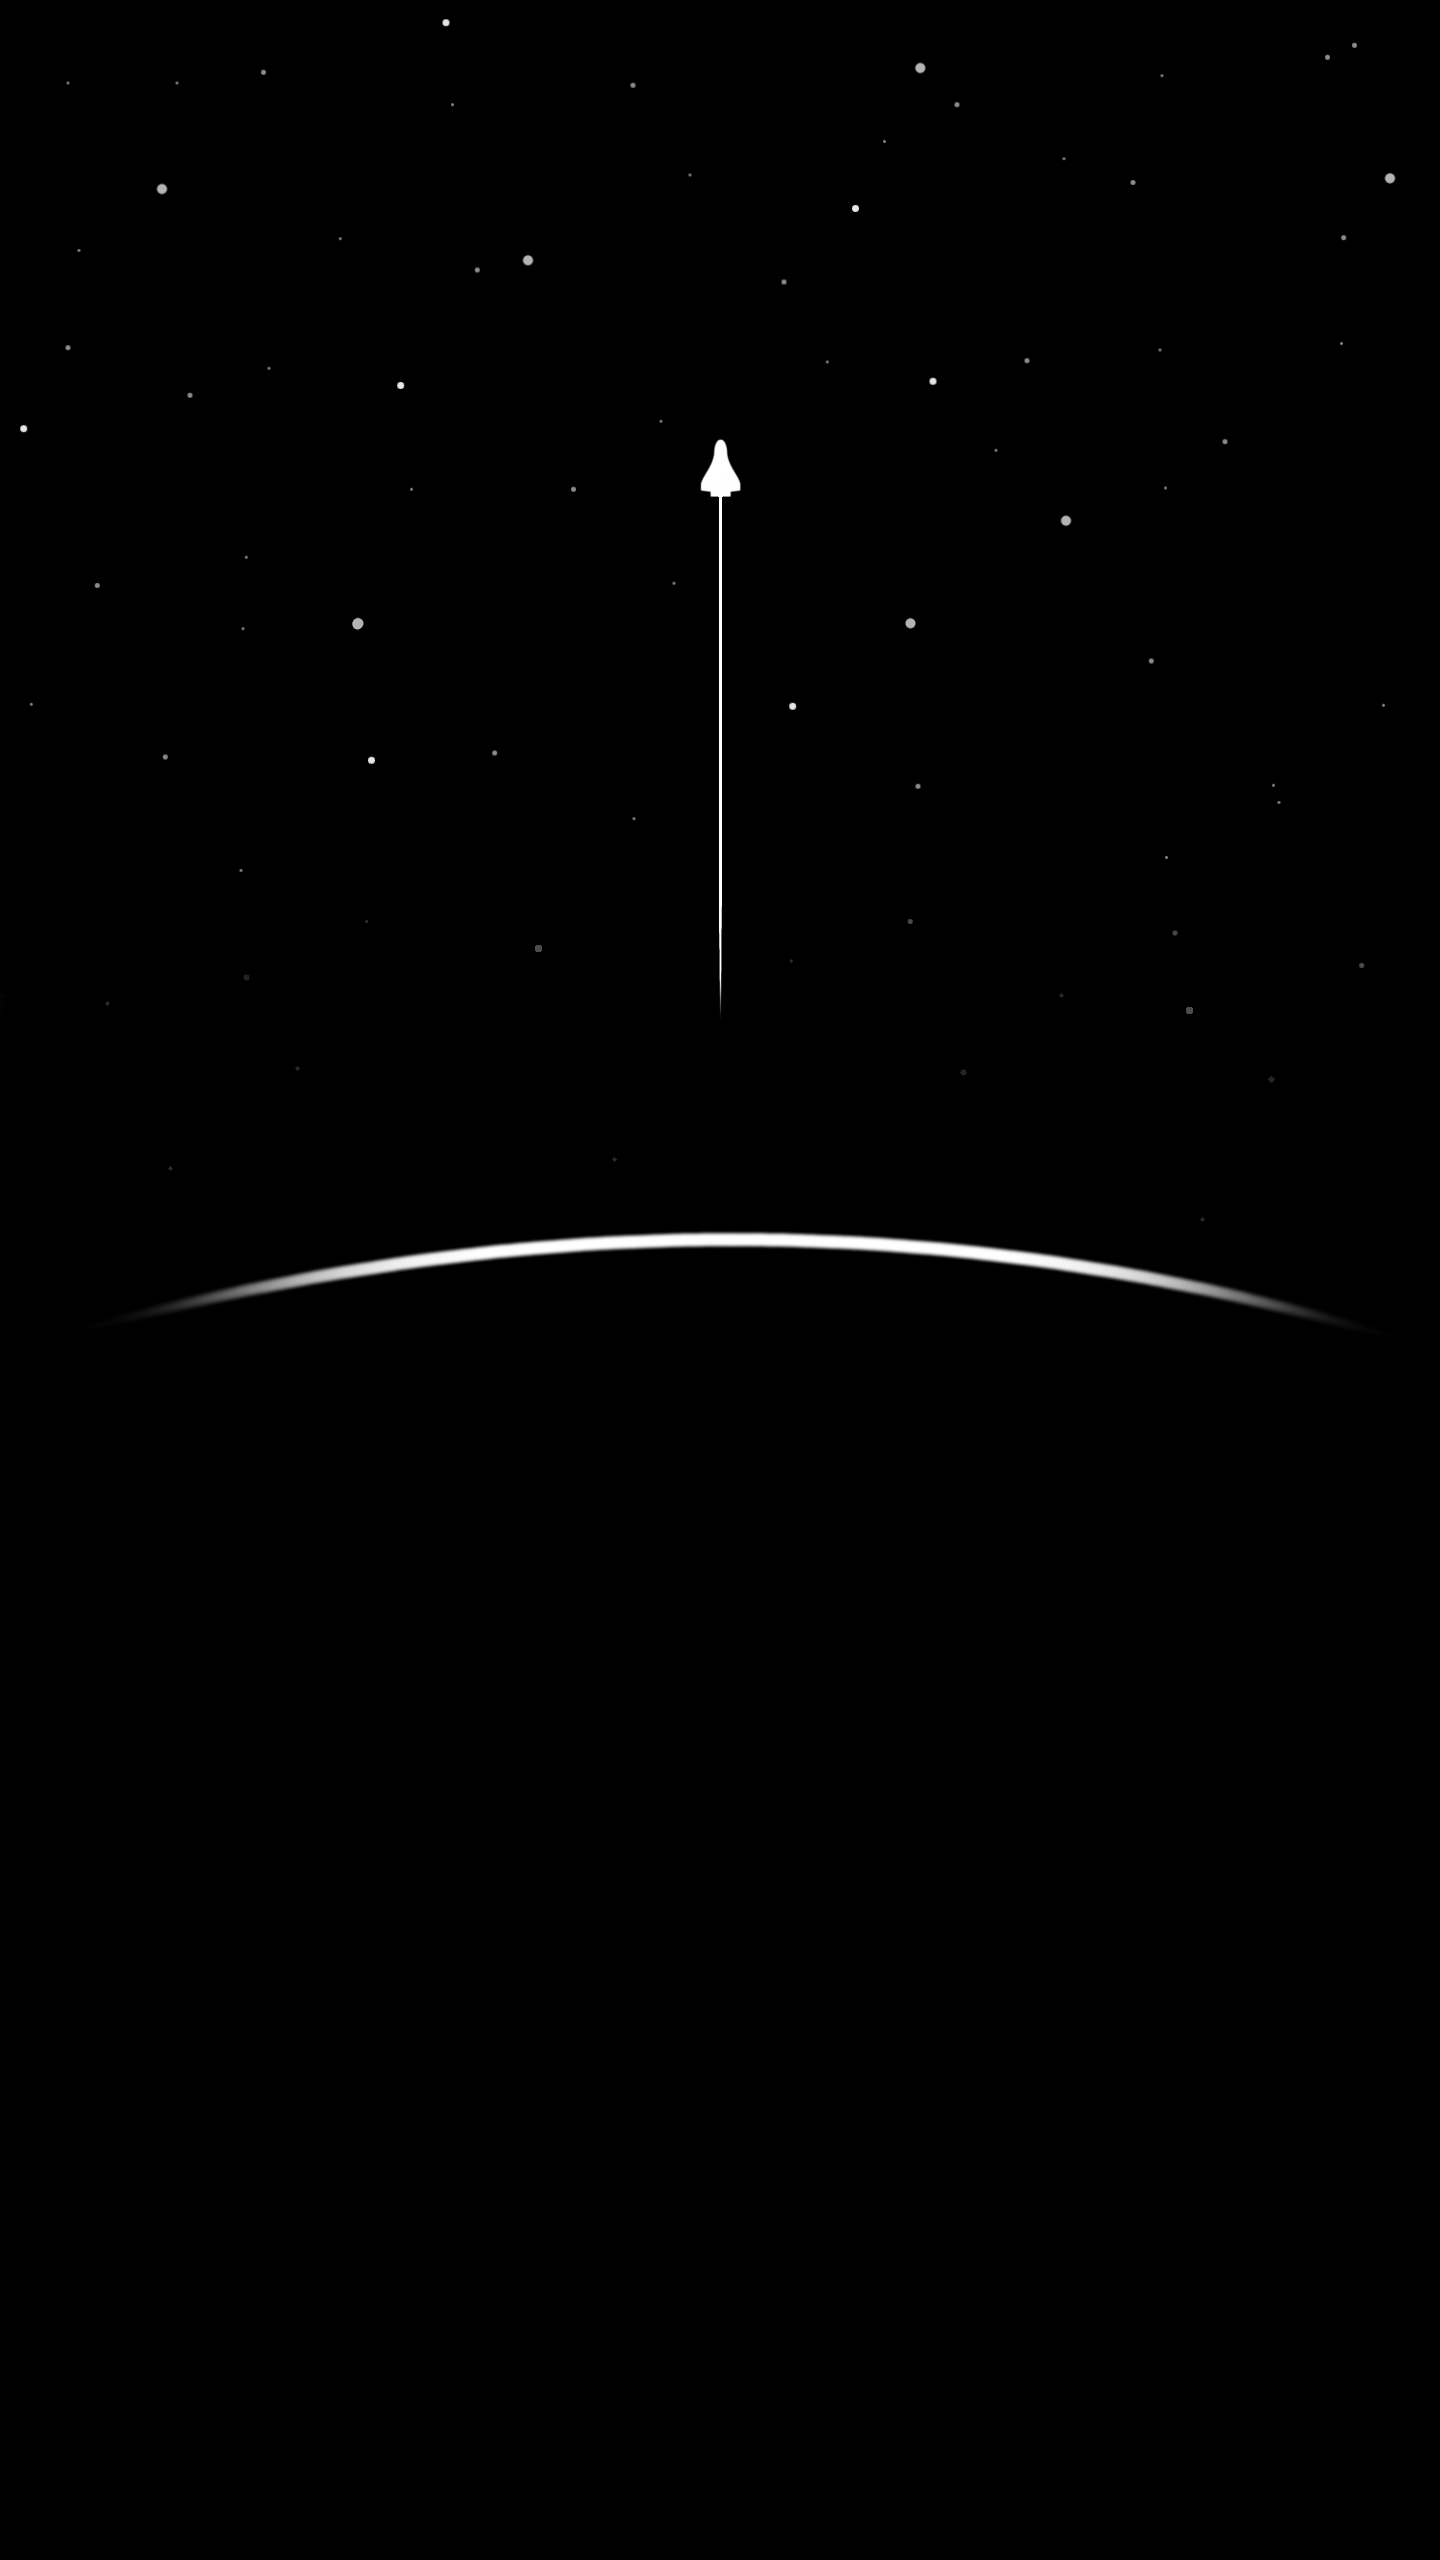 Black Amoled Wallpaper Group , Download for free. Dark background wallpaper, Black HD wallpaper, Dark wallpaper